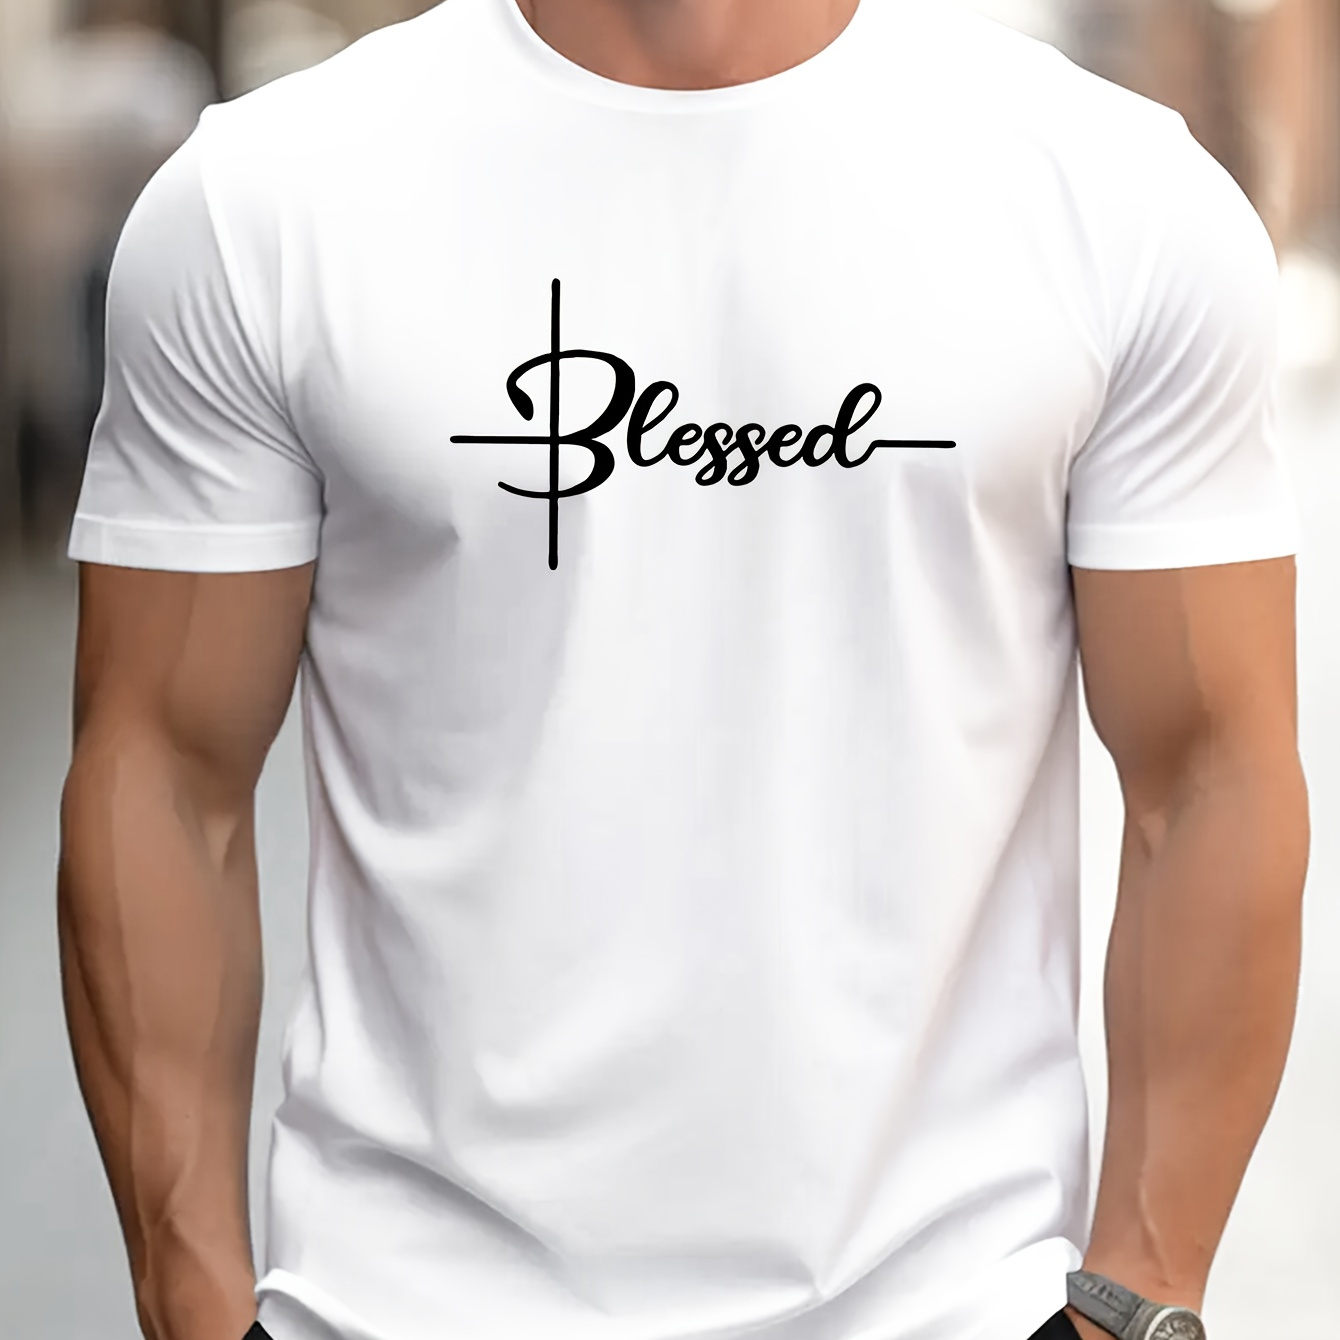 

Men's Casual Cotton Short-sleeved T-shirt, Spring And Summer " Blessed " Print Top, Comfortable Round Neck Tee, Regular Fit, Versatile Fashion For Everyday Wear